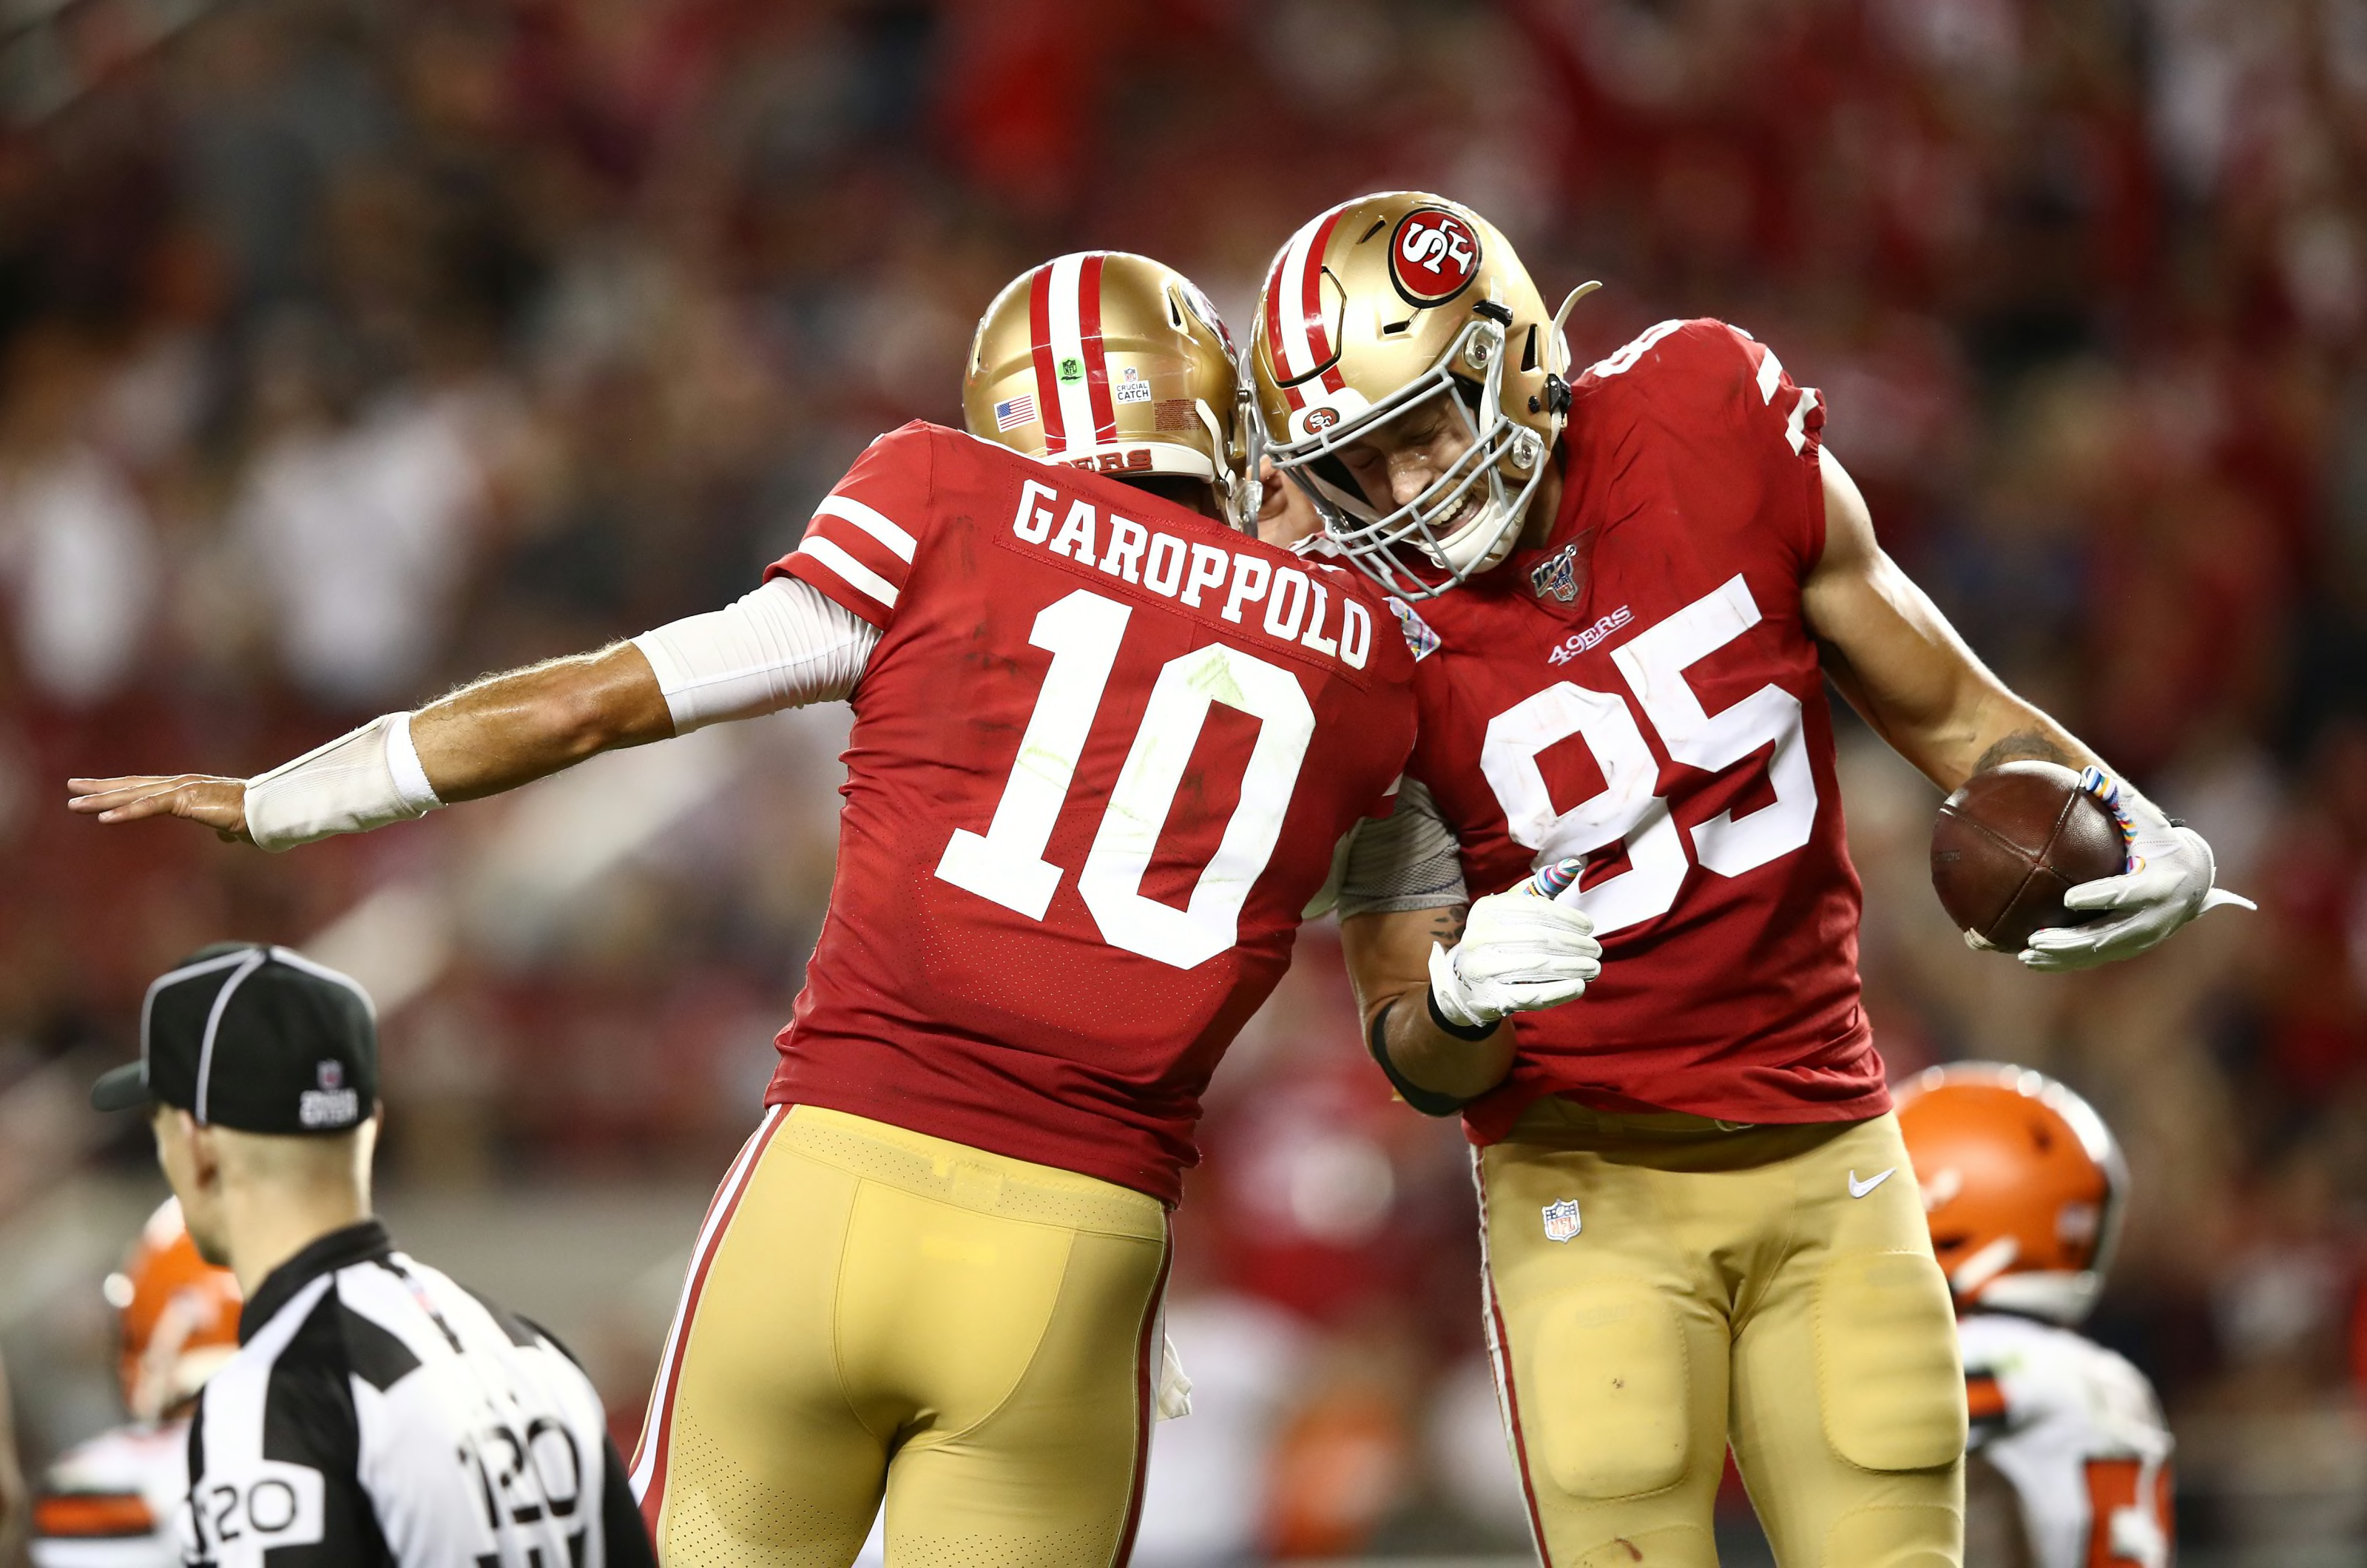 49ers Power ranking top10 players entering the 2020 season